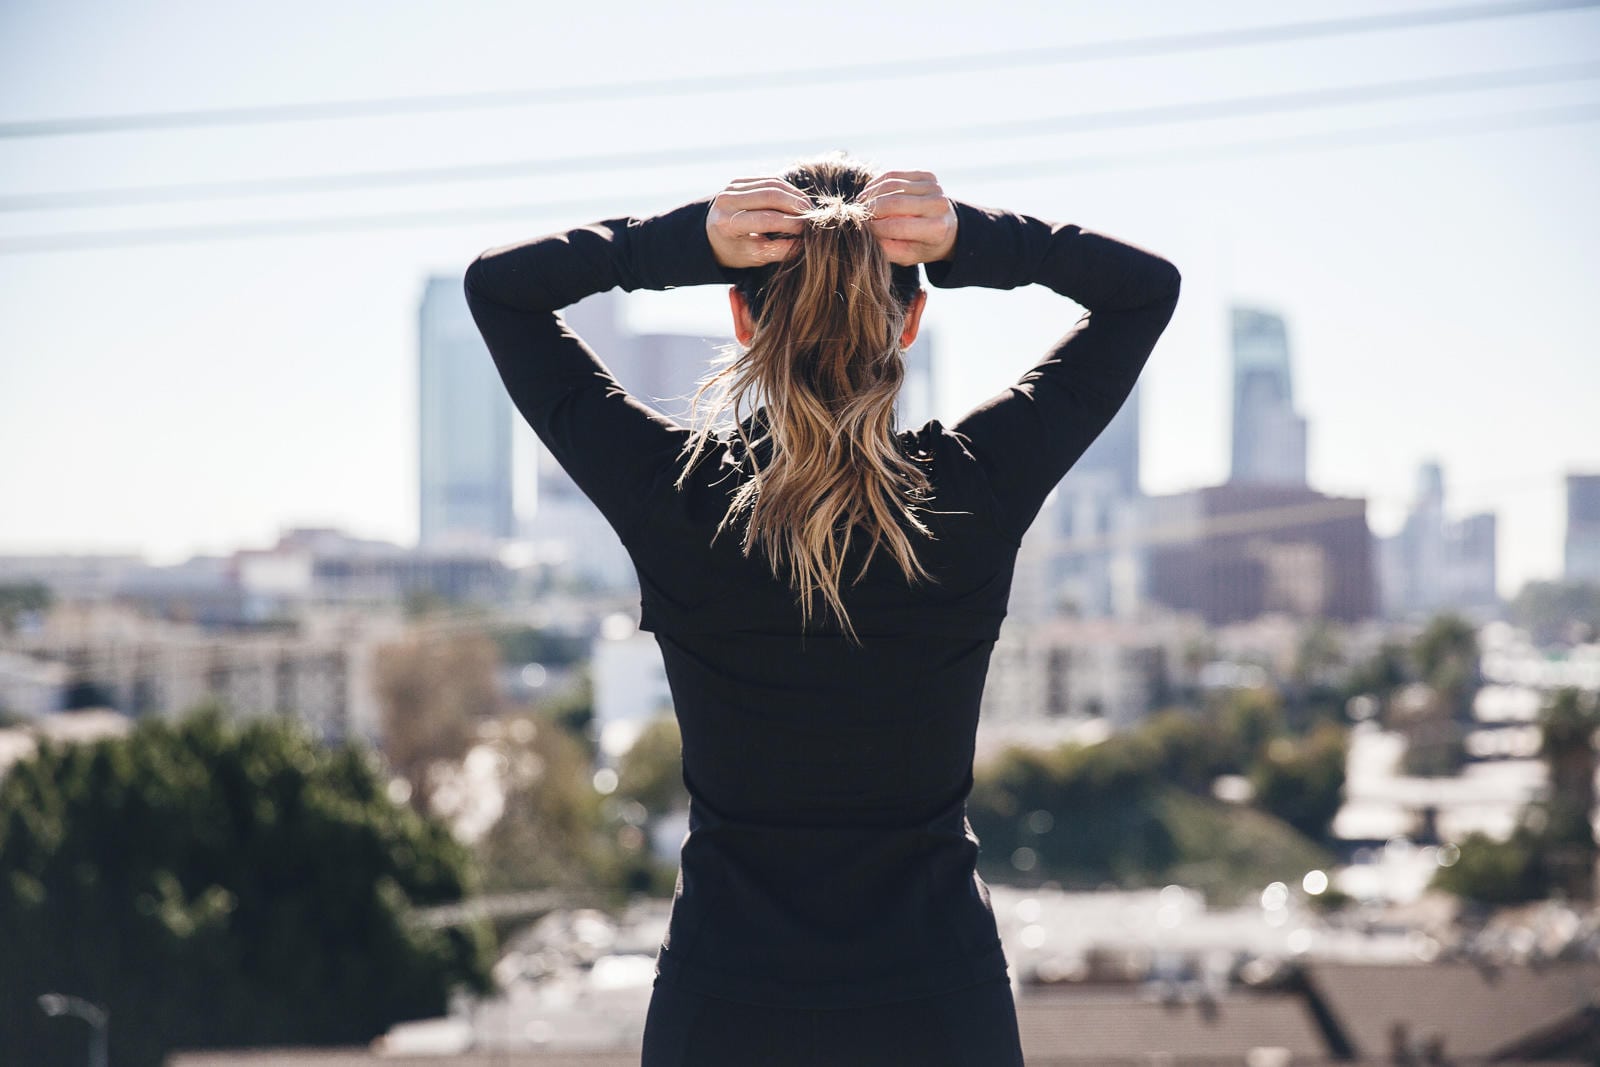 Transitioning Your Workout Clothes for the Colder Months | The Girl From Panama @pamhetlinger